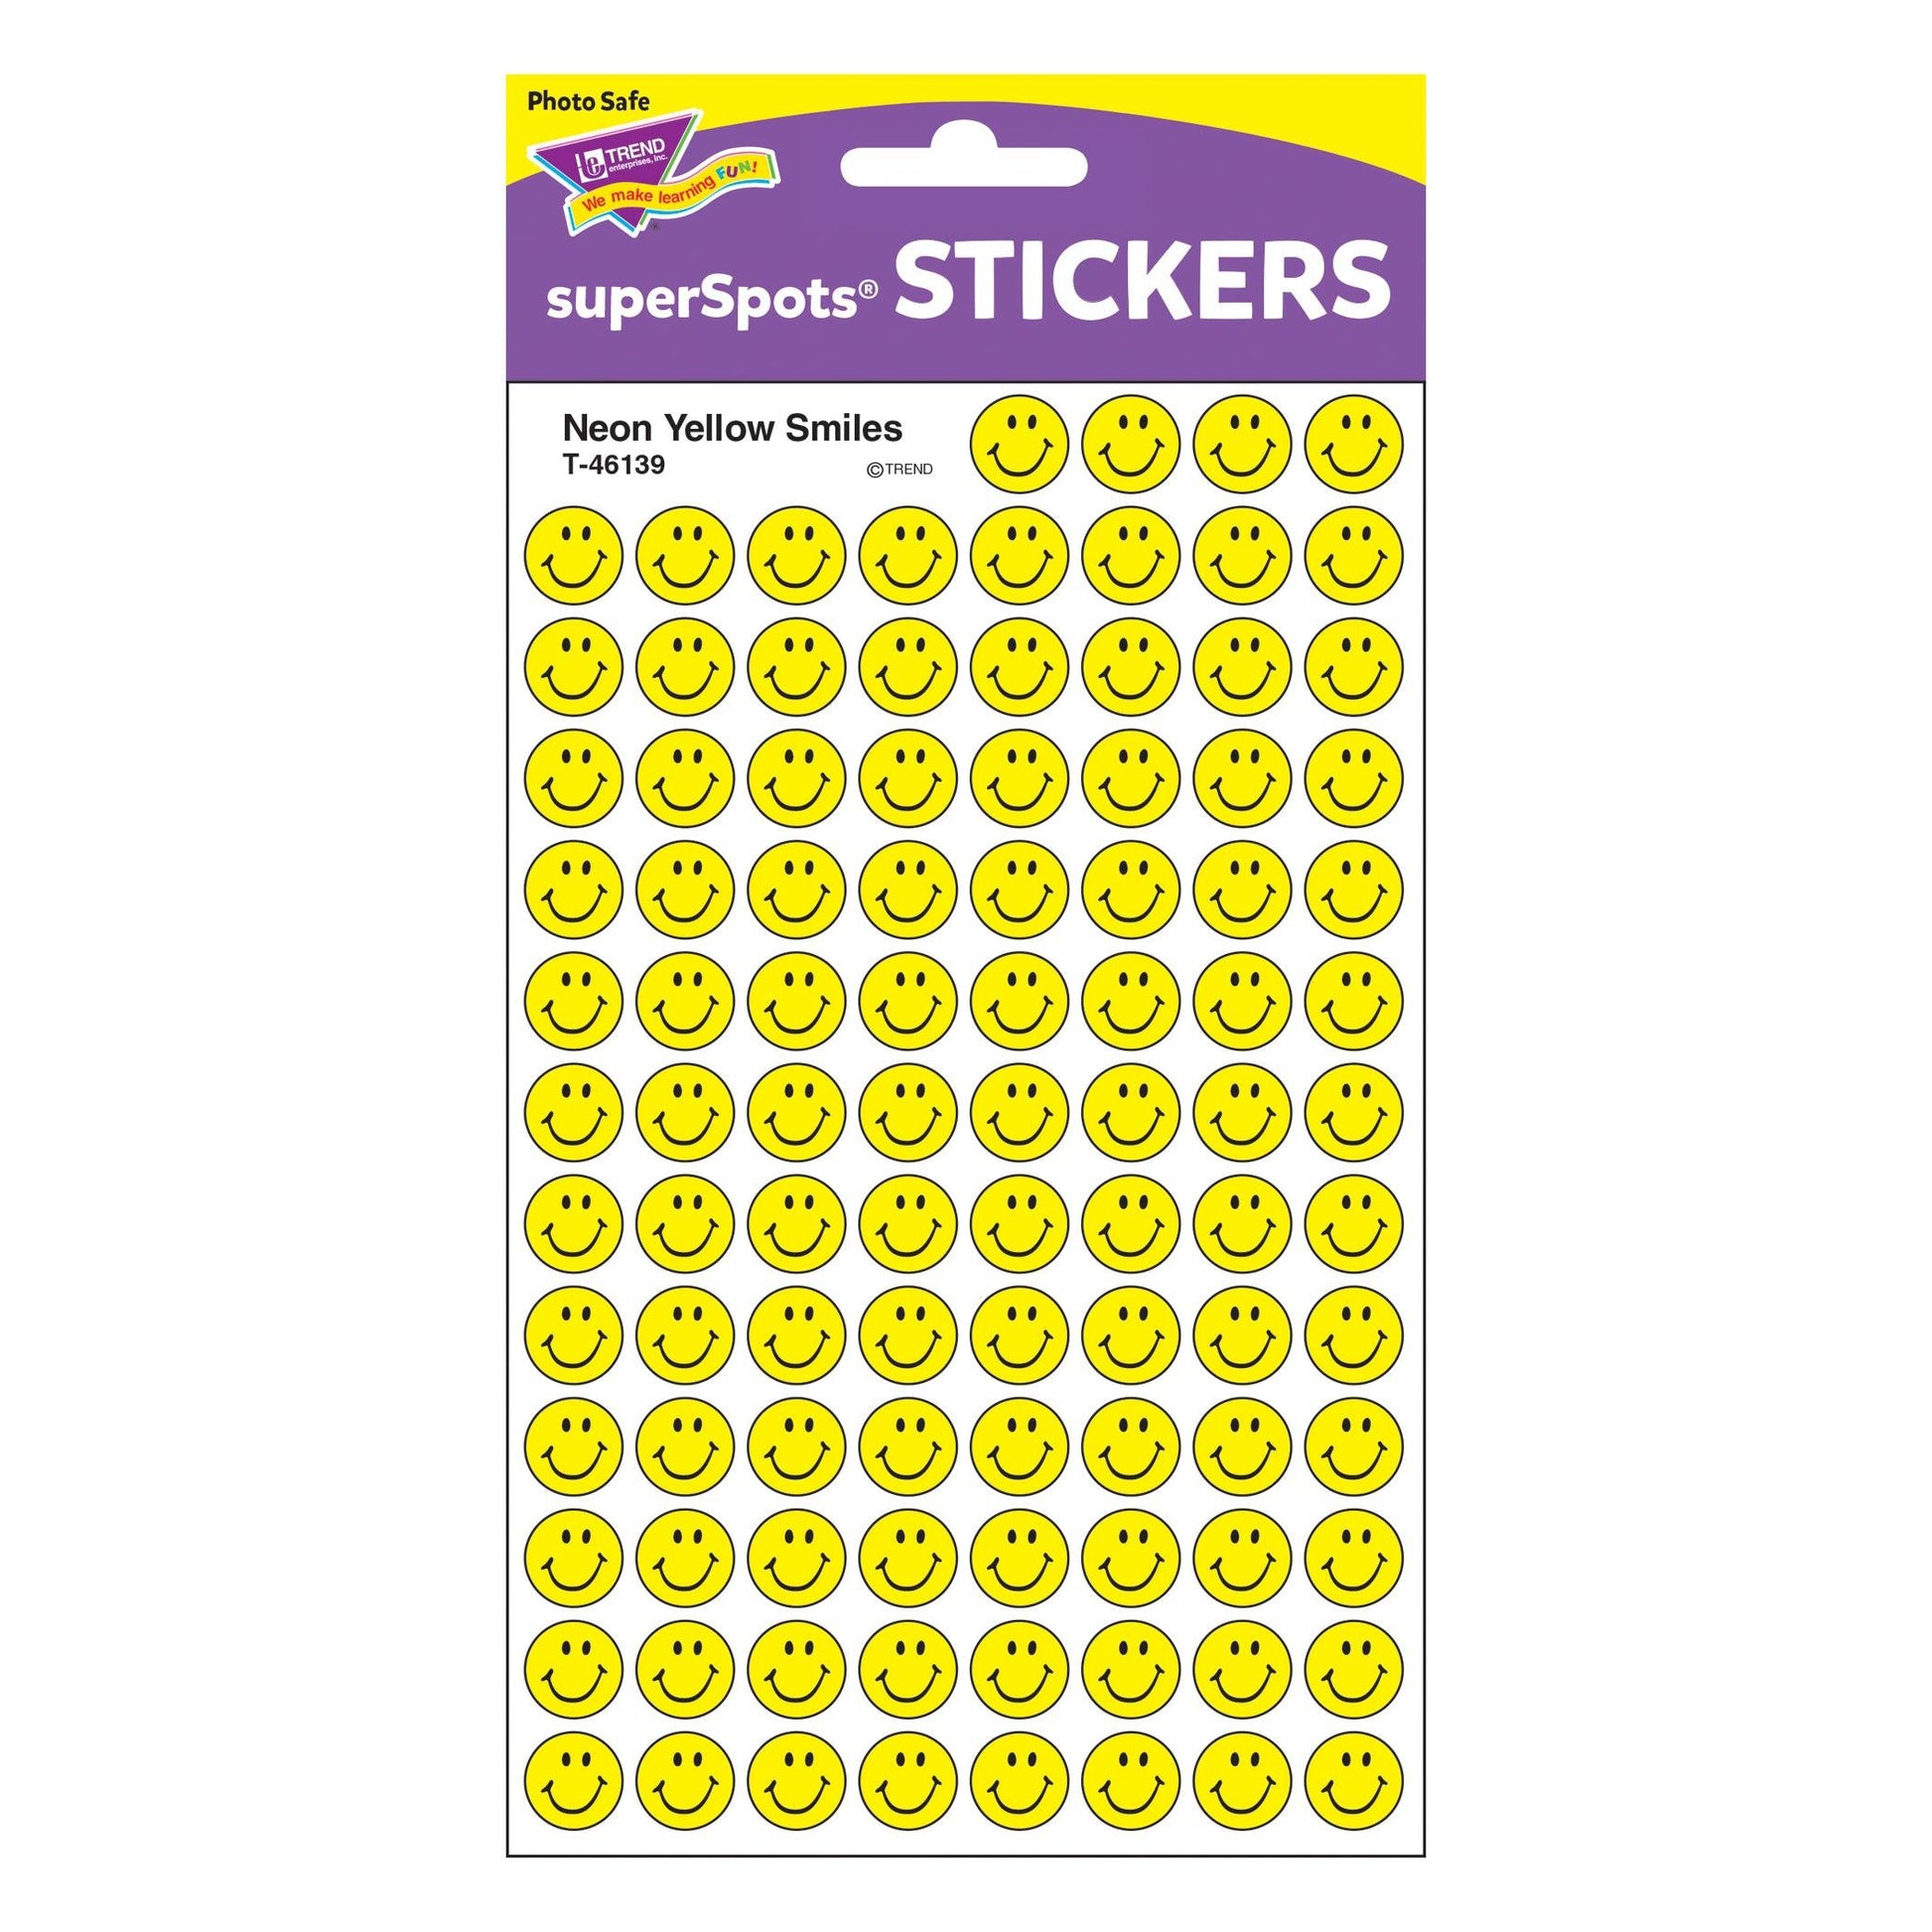 Neon Yellow Smiles superSpots® Stickers, 800 Per Pack, 6 Packs - Loomini